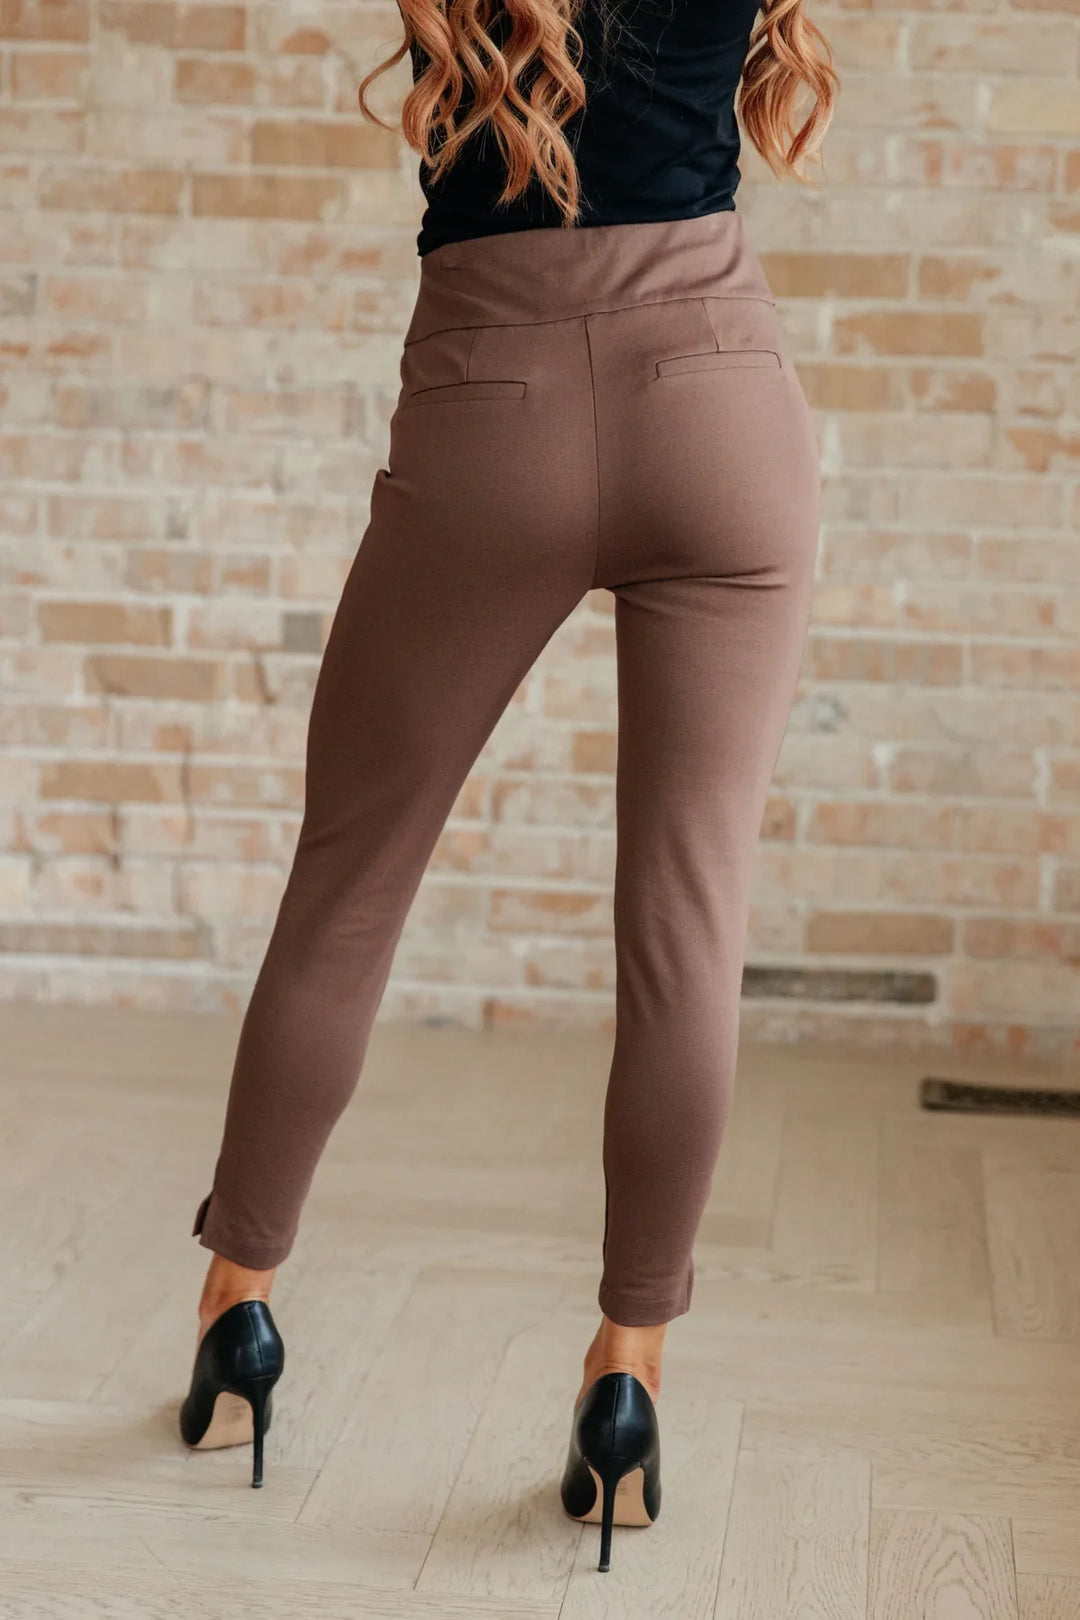 Magic Ankle Crop Skinny Pants in Twelve Colors-Pants-Inspired by Justeen-Women's Clothing Boutique in Chicago, Illinois